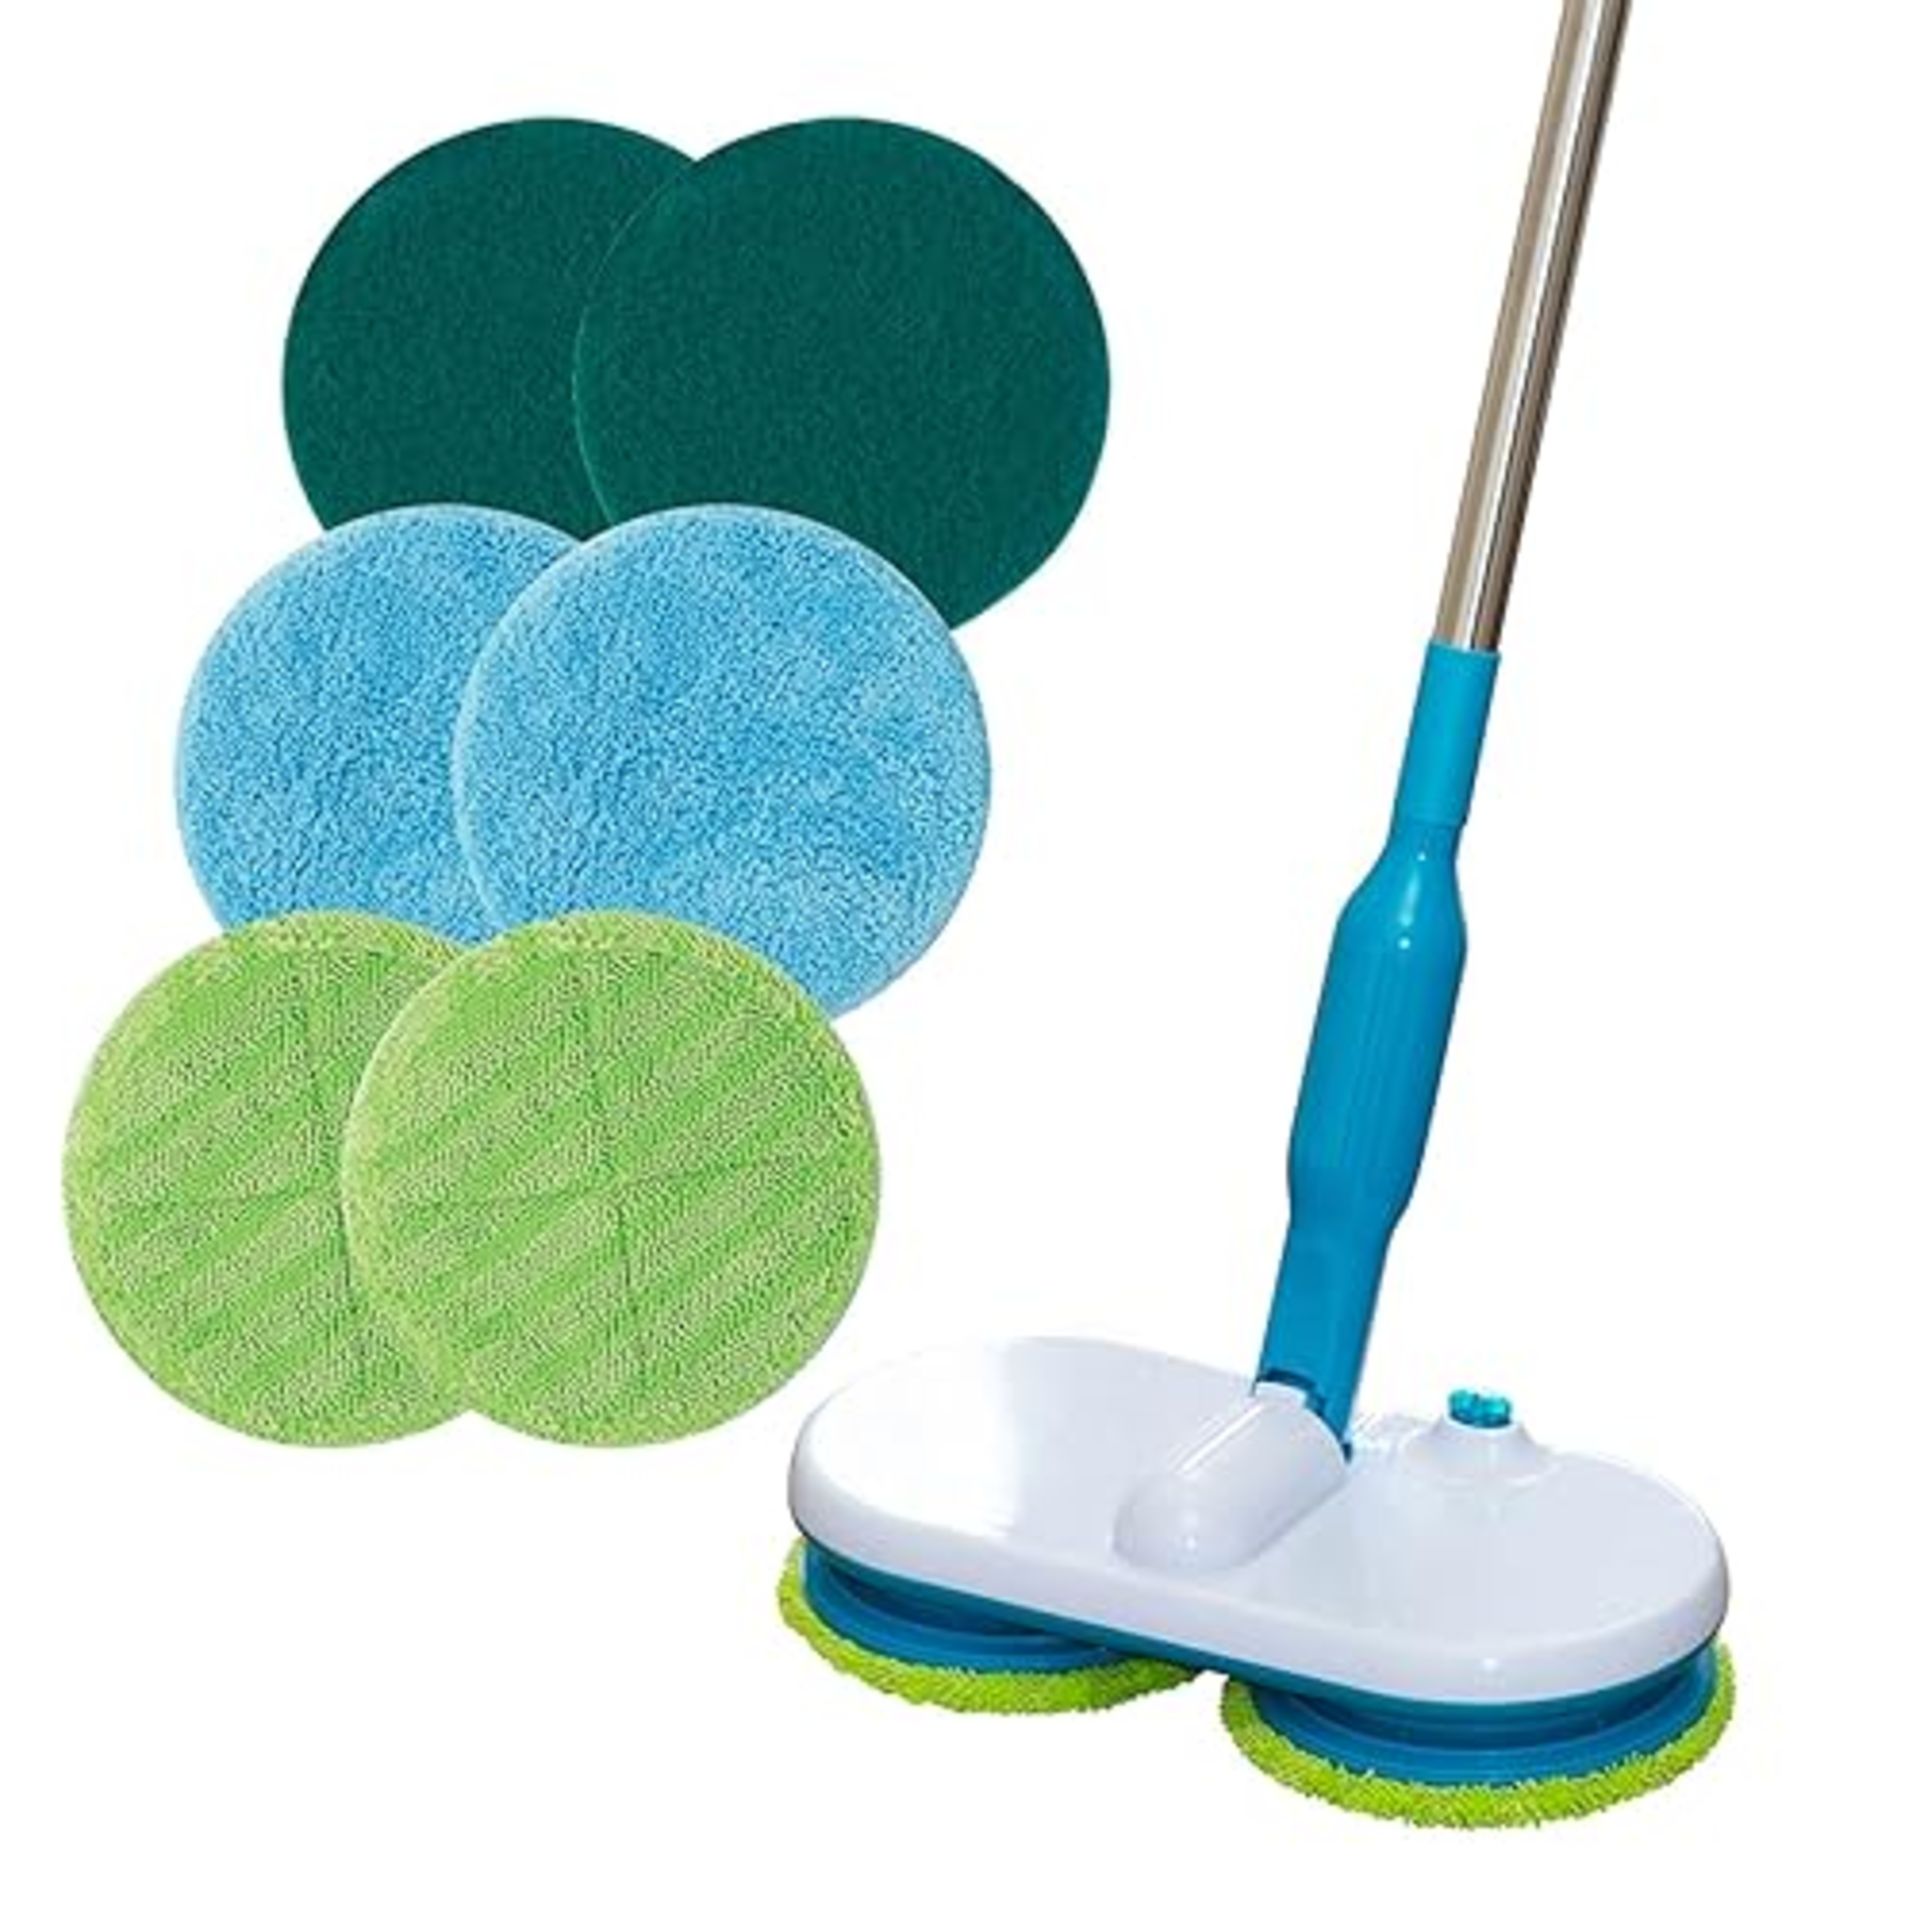 High Street TV Floating Mop - Motorised Cordless & Rechargeable - Spinning Mop - Inclu - Image 4 of 6